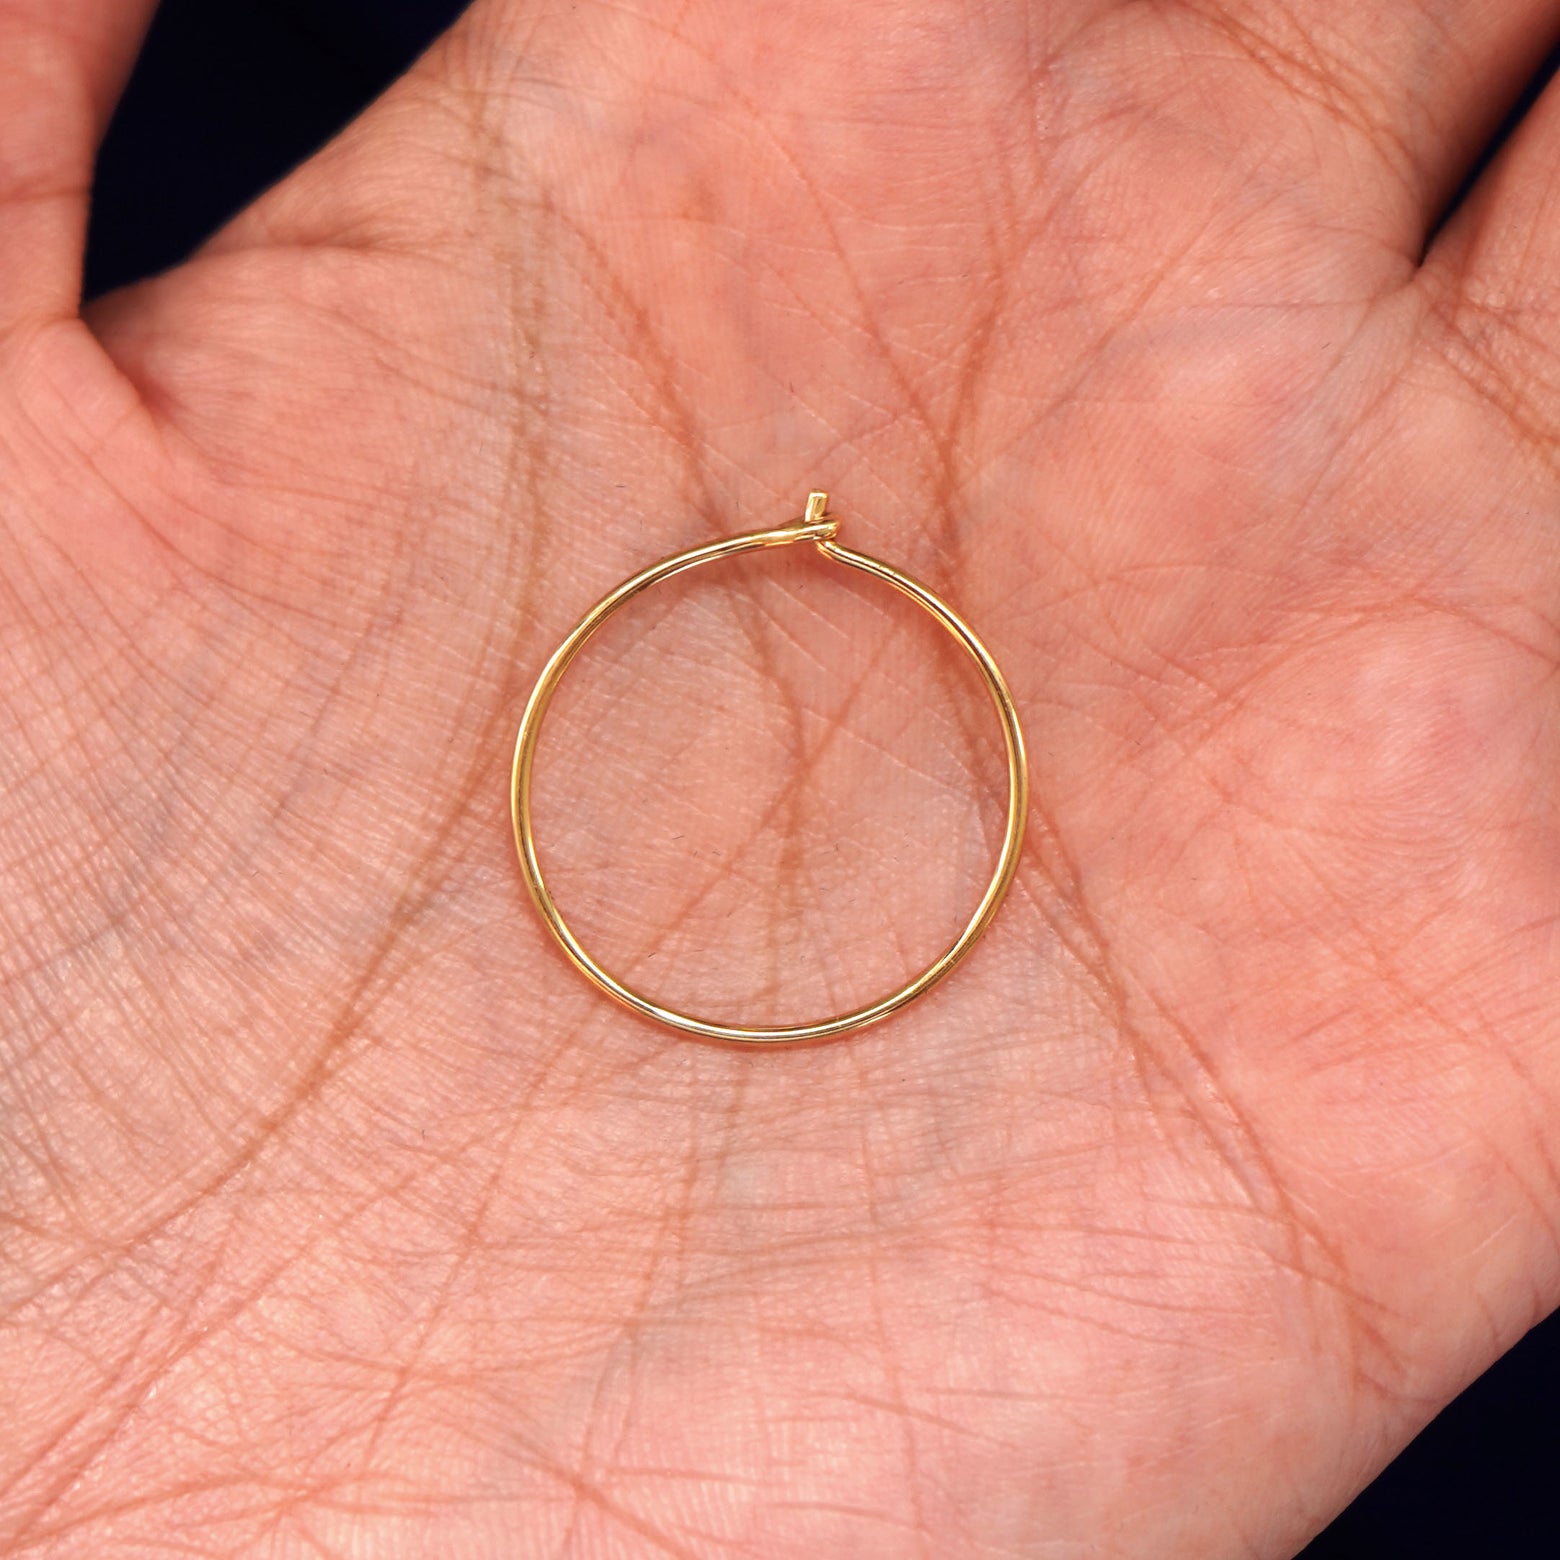 A solid 14k yellow gold Medium Hoop Earring closed in a model's palm